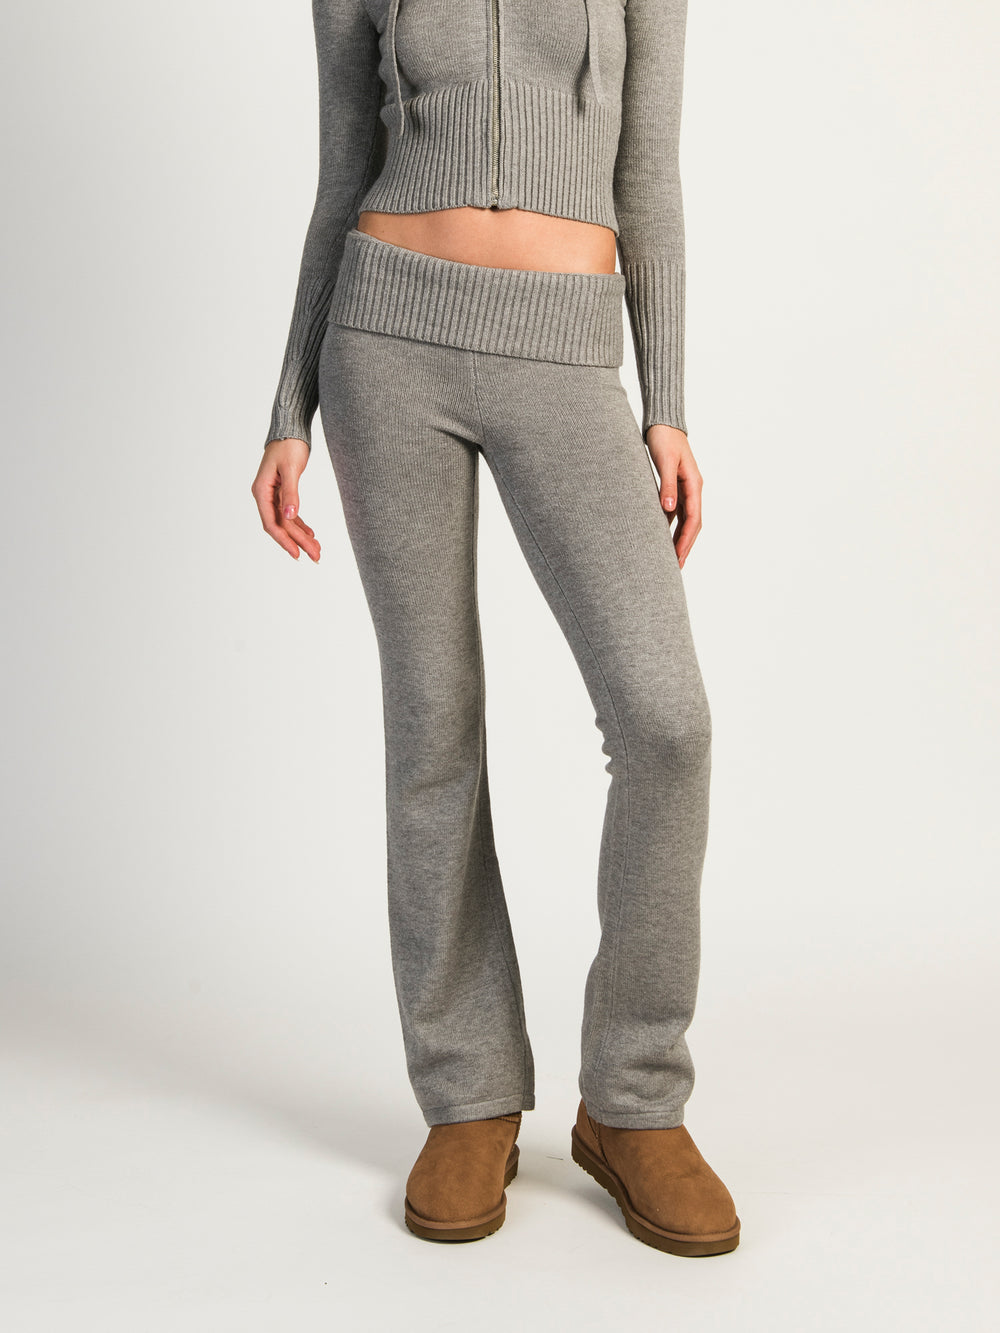 The Cloud Pant & The Cloud Pant Ultra High: luxurious comfort in